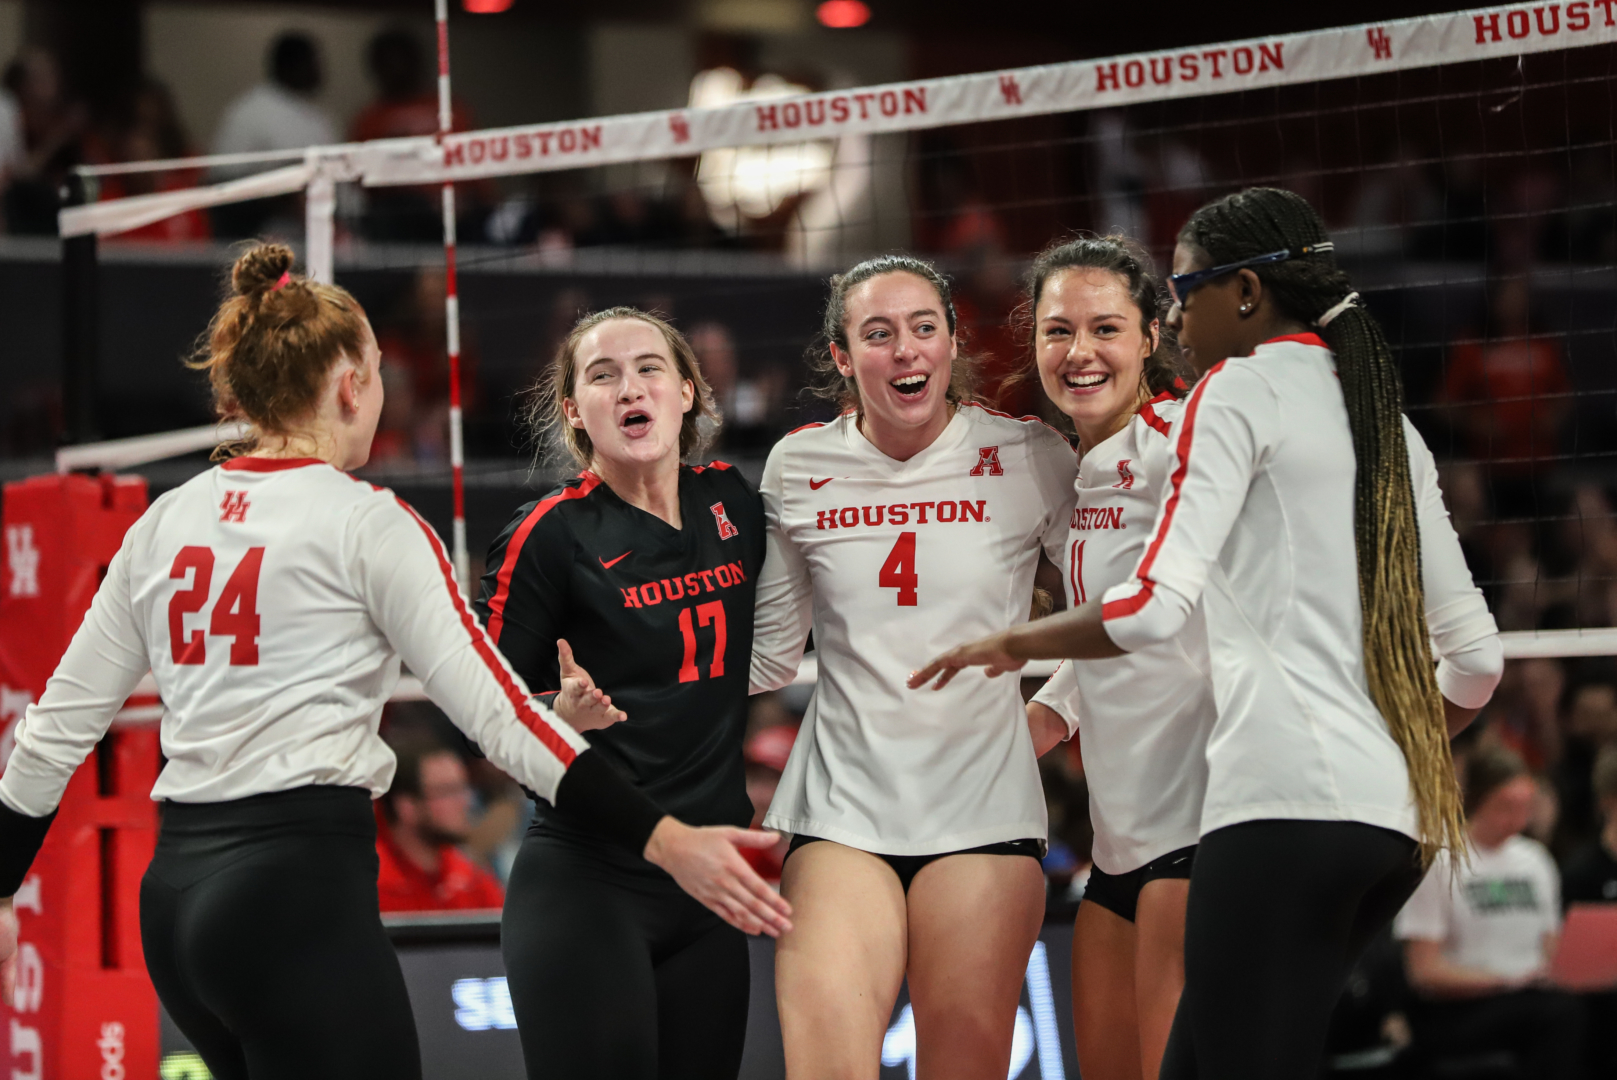 Houston volleyball won its first NCAA Tournament match since 1994 with a five-set victory over South Dakota on Friday in Omaha, Nebraska. | Sean Thomas/The Cougar